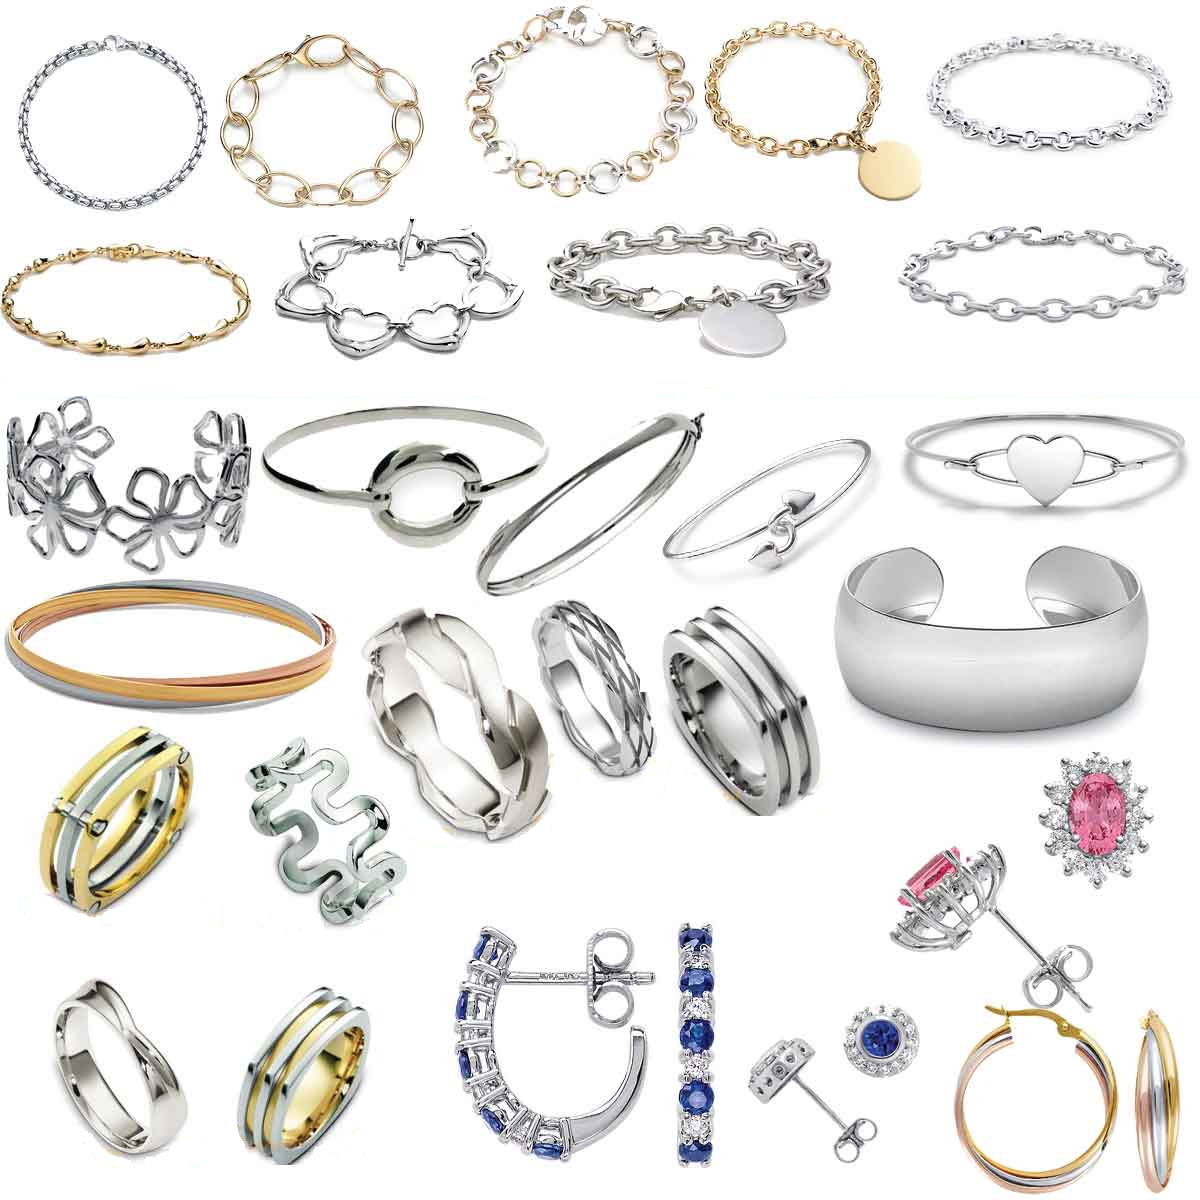 Handmade wholesale sterling silver jewelry